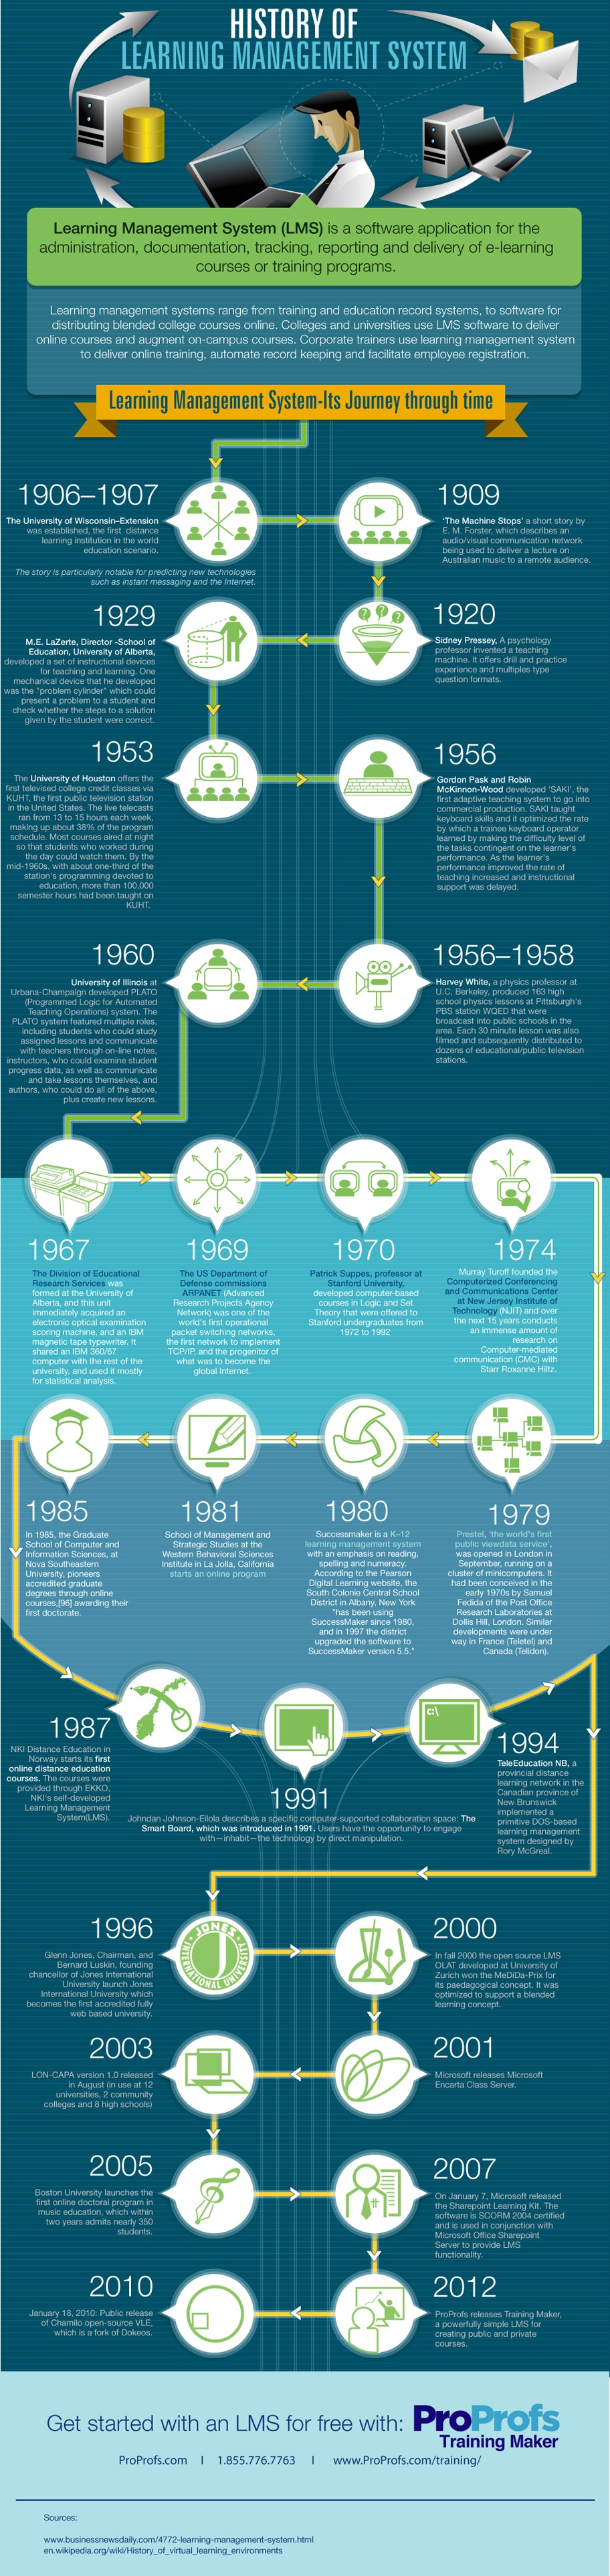 The History of Learning Management Systems Infographic